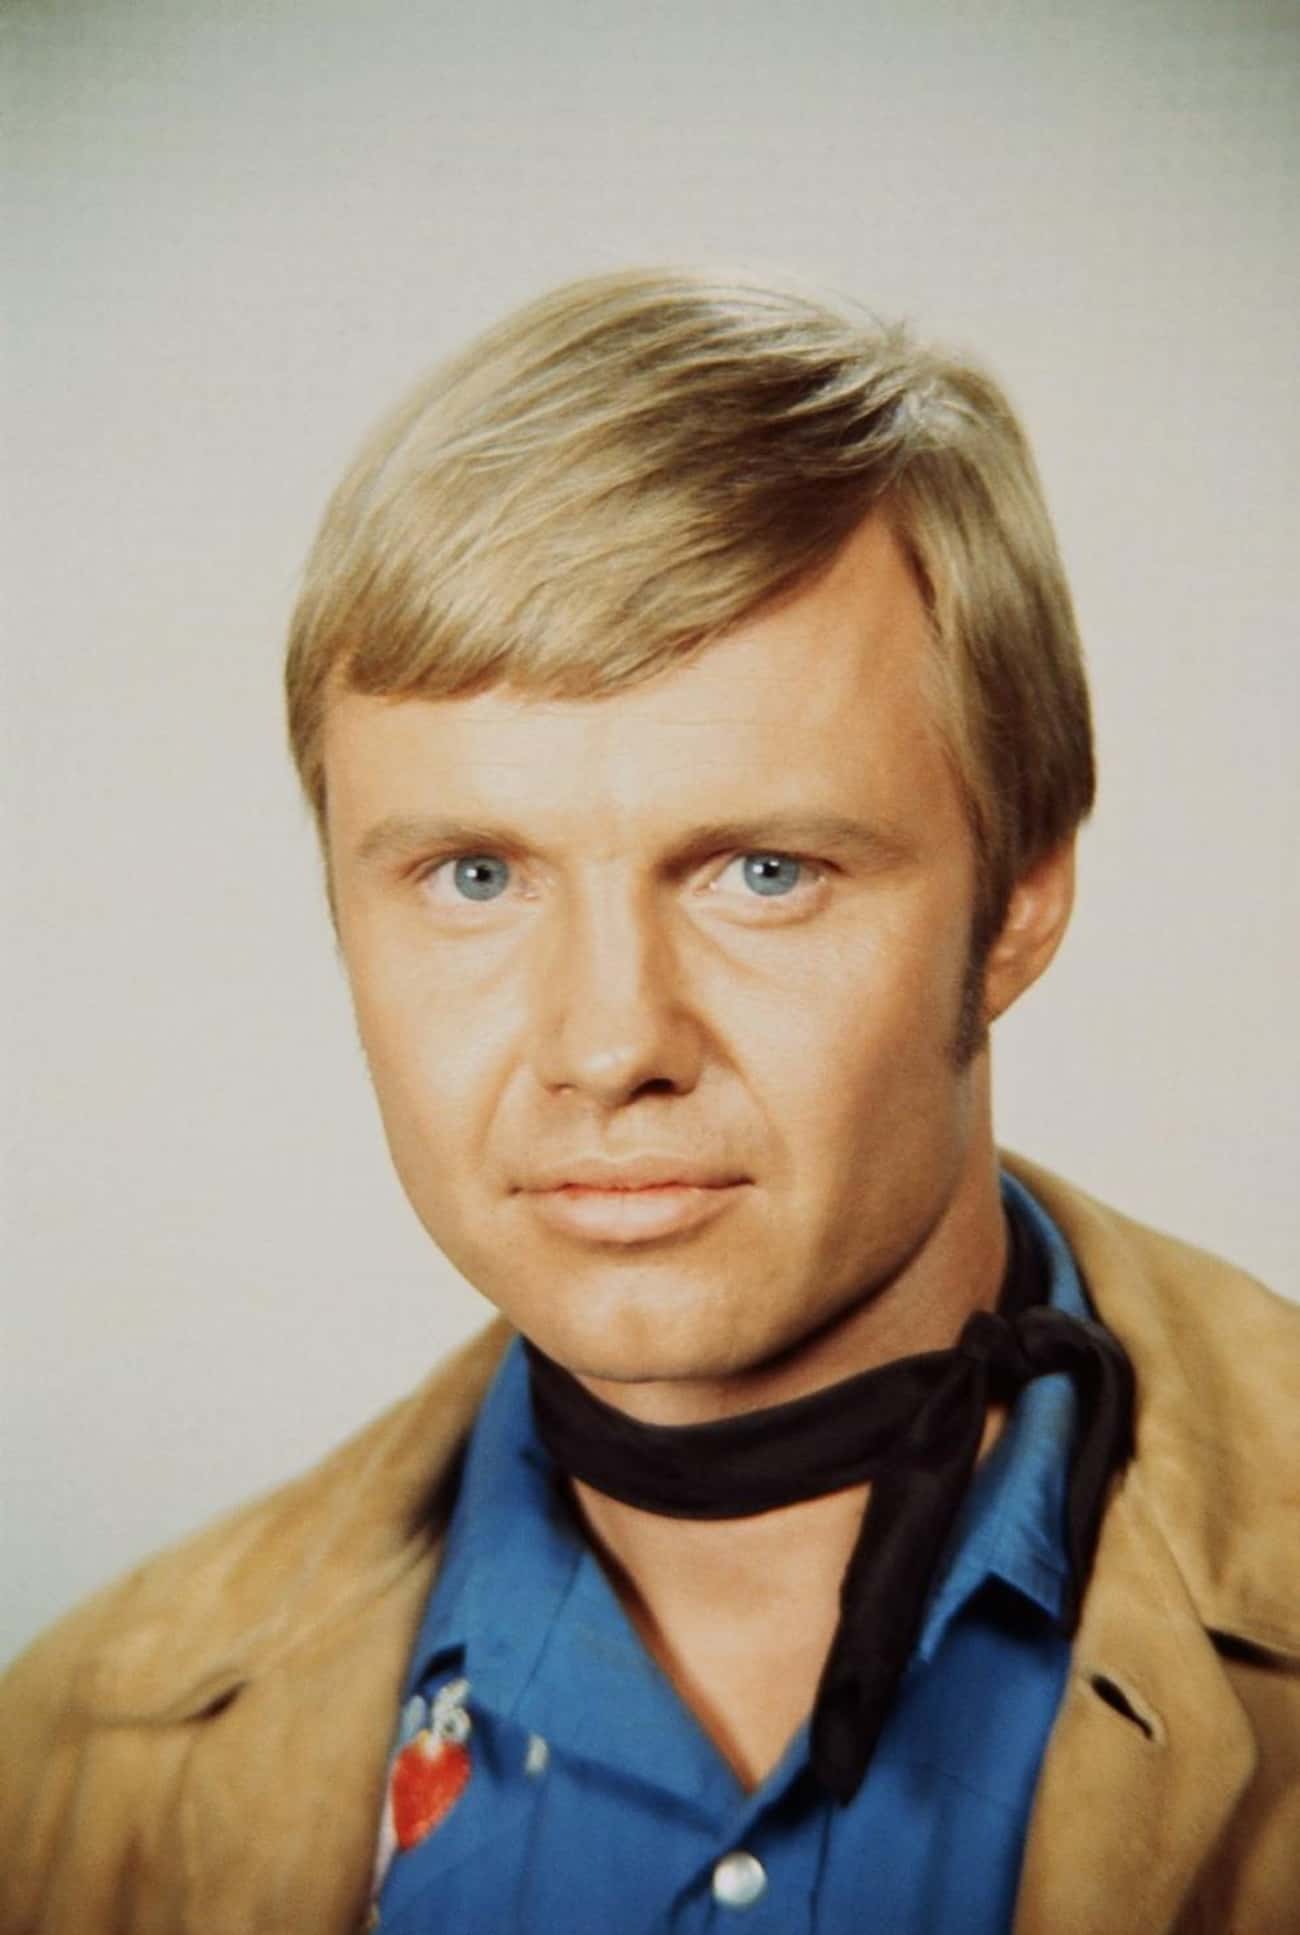 Young Jon Voight in Beige Coat and Blue Buttondown Shirt